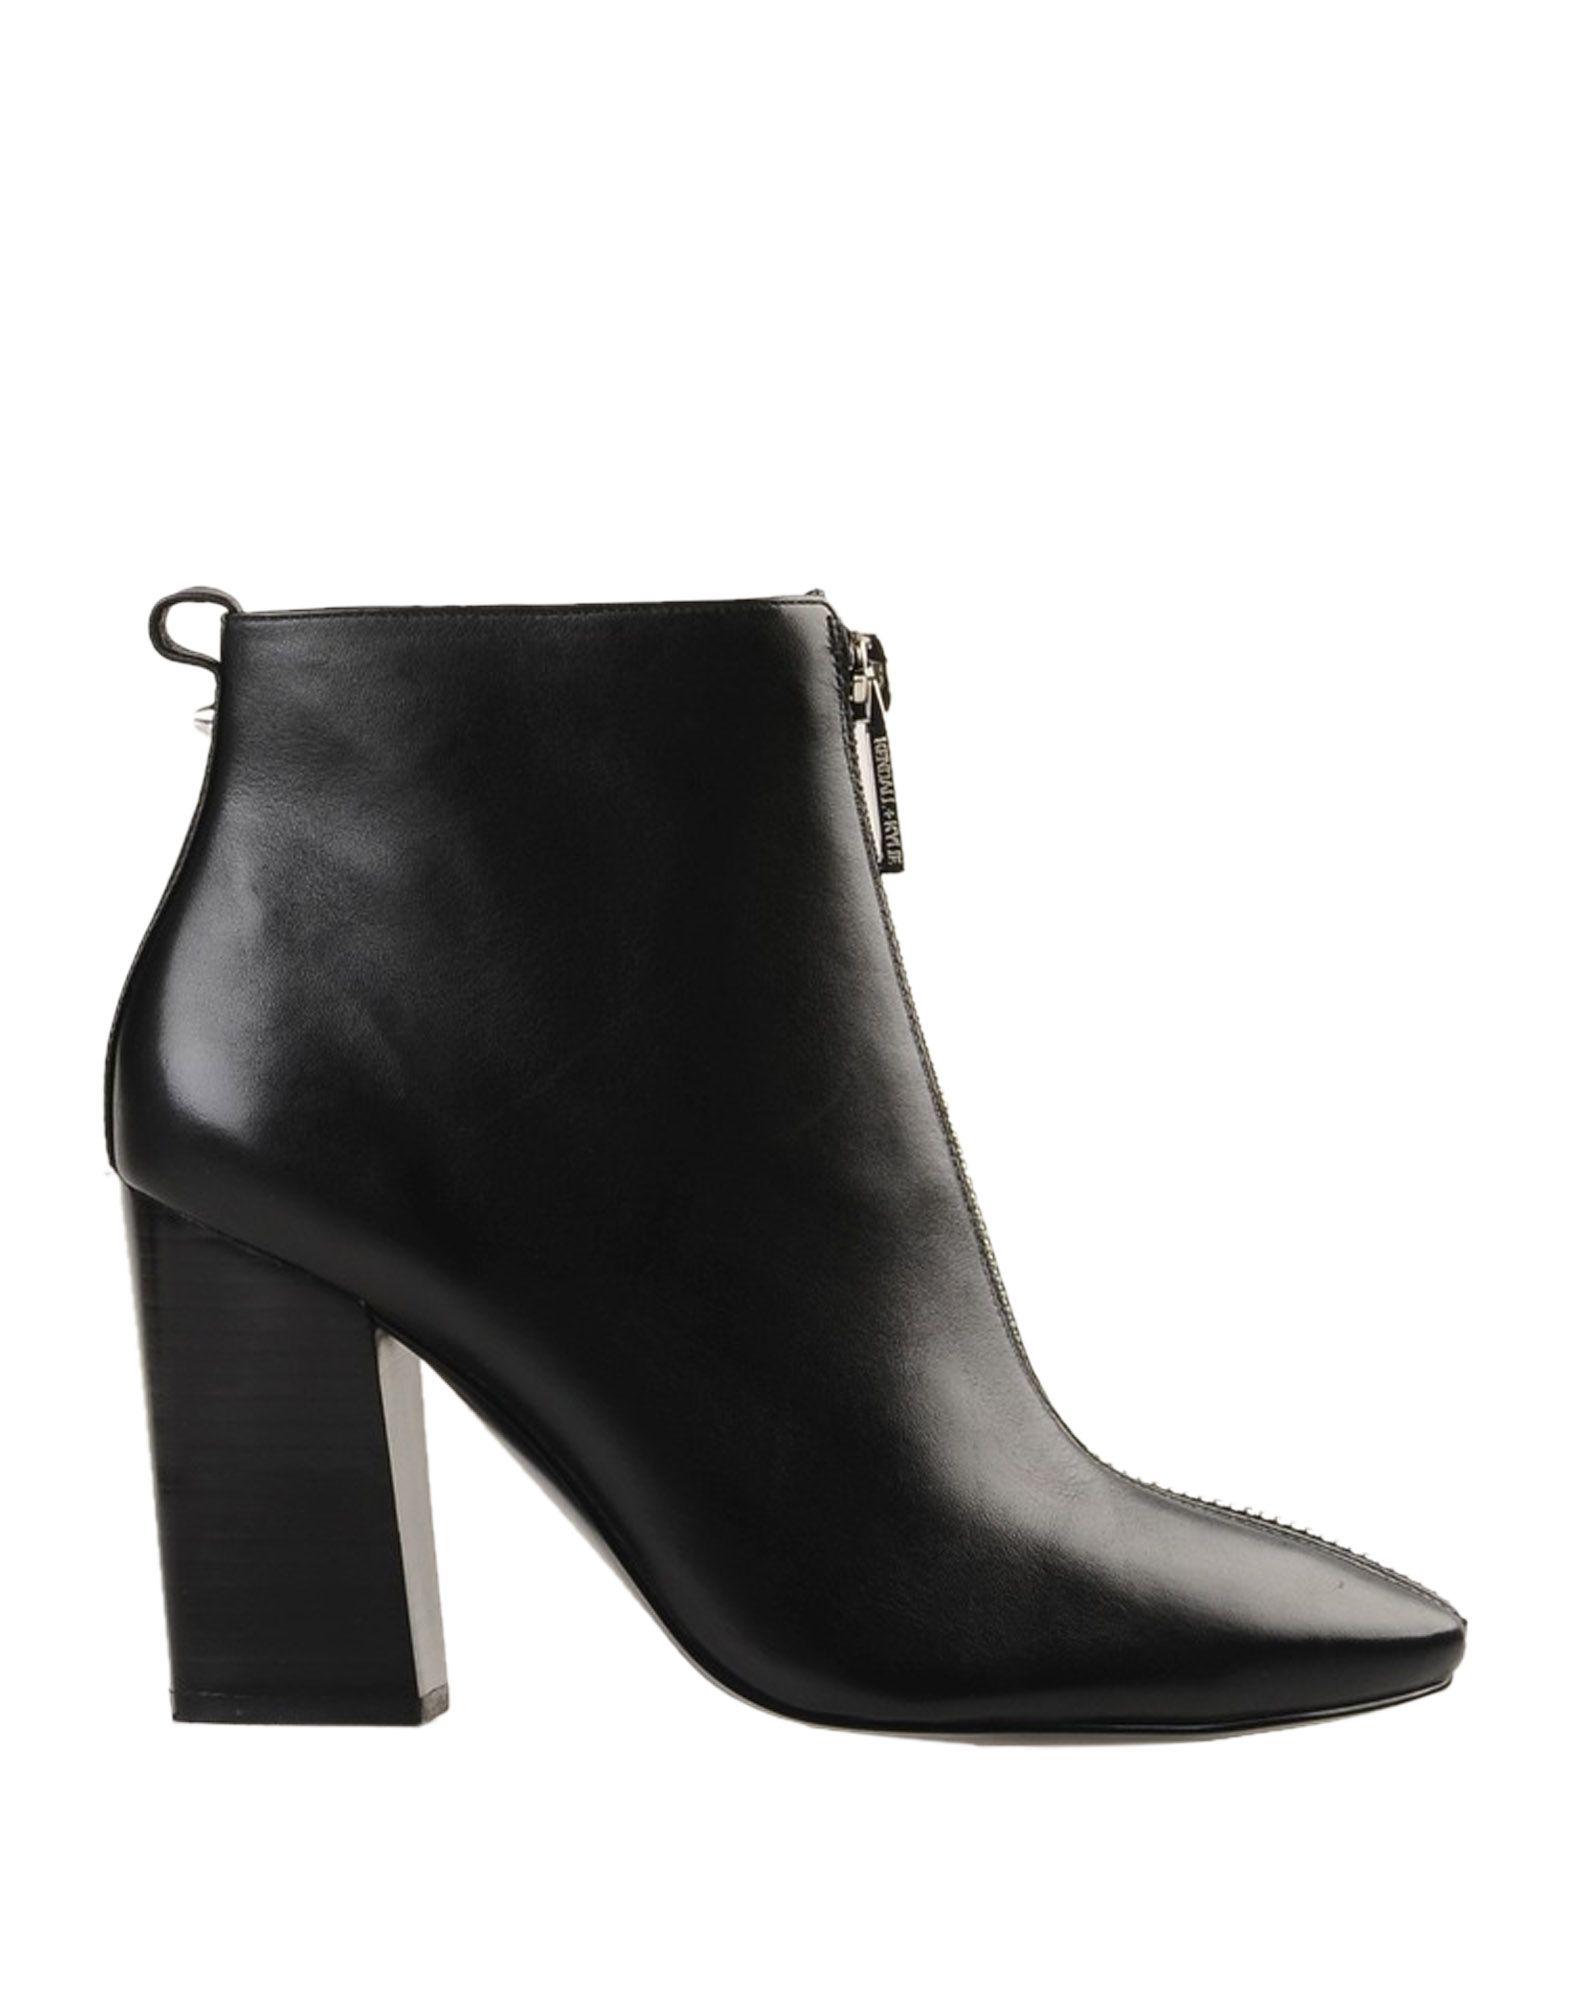 Kendall + Kylie Ankle Boots in Black - Lyst